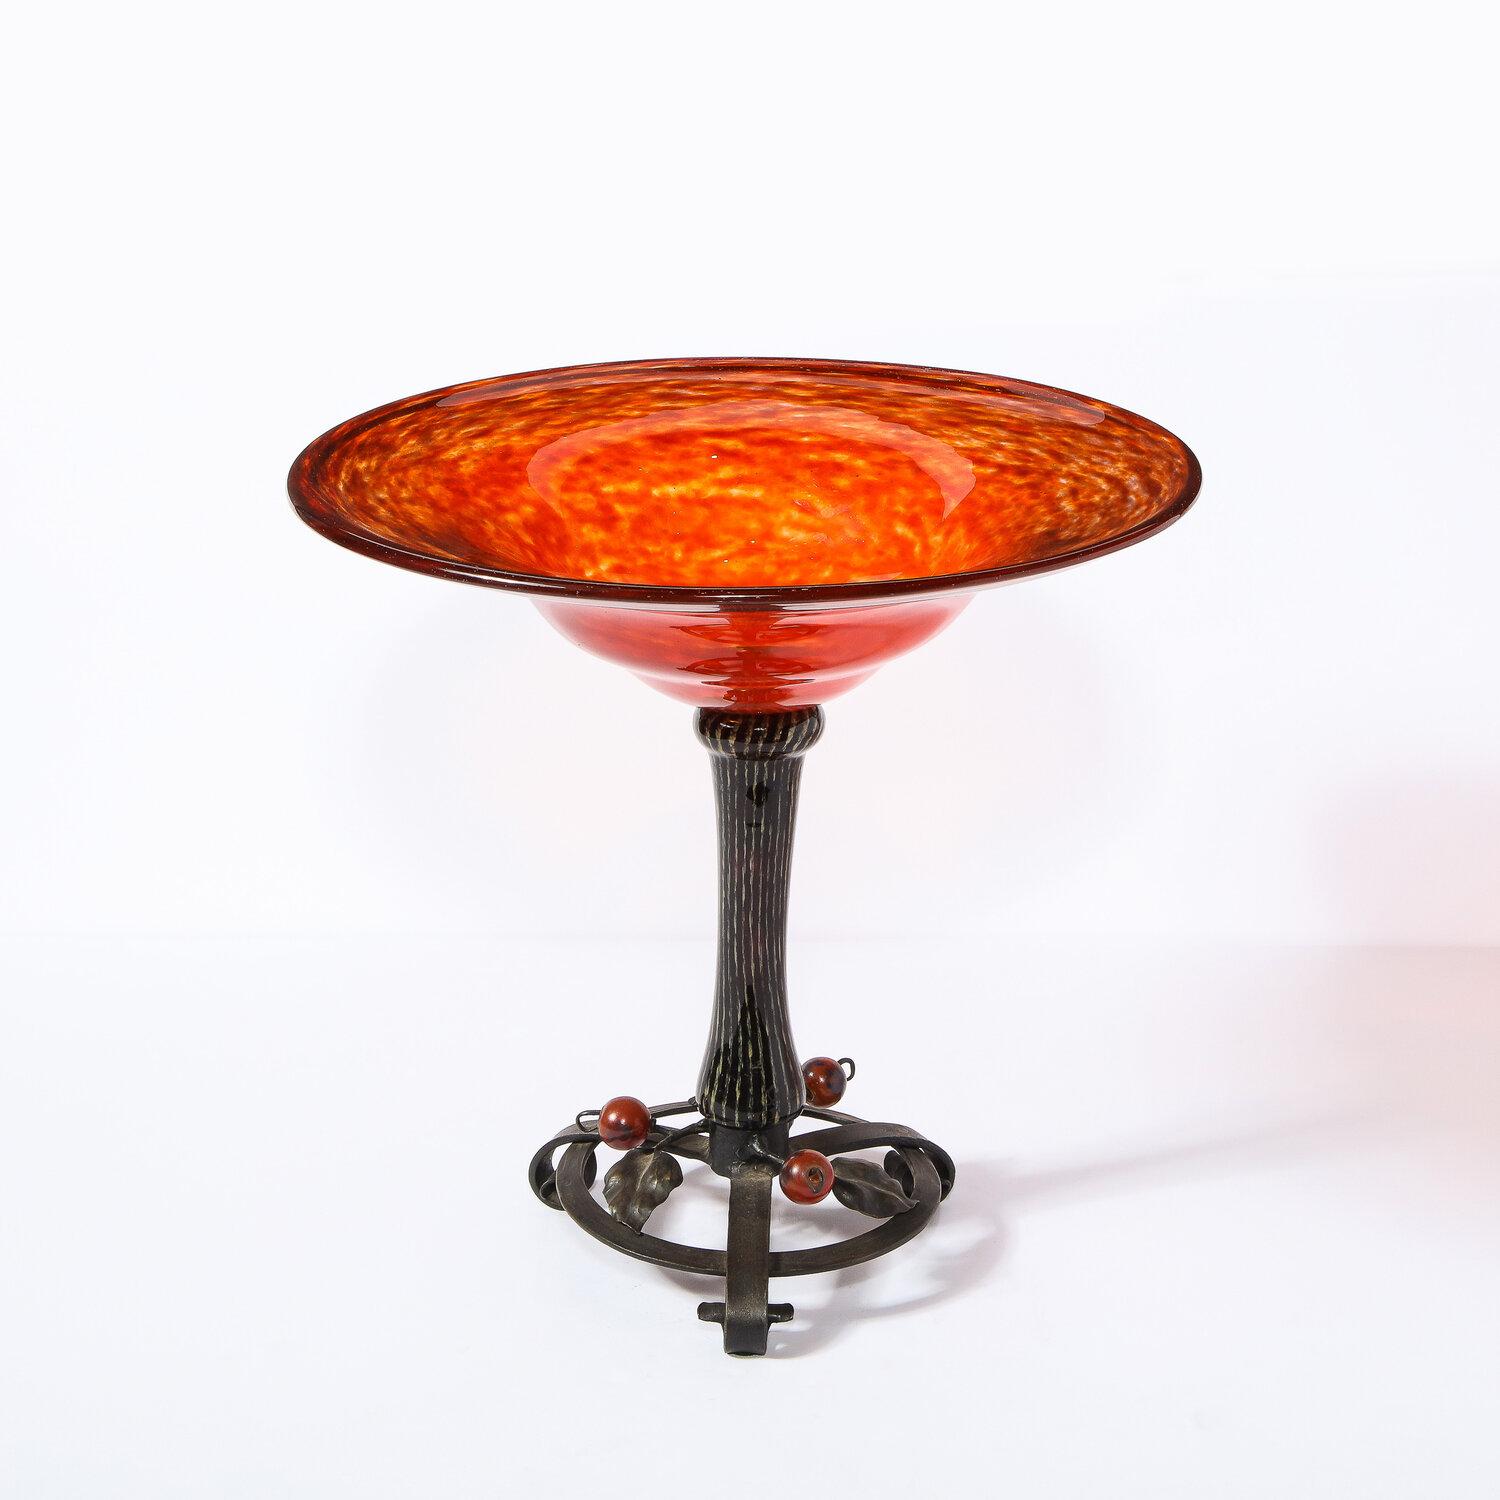 This sophisticated Art Deco bowl was realized and signed by Charles Schneider in France circa 1920. It features a mottled carnelian glass top with a wrought iron base adorned with ruby spherical embellishments and stylized foliate detailing,